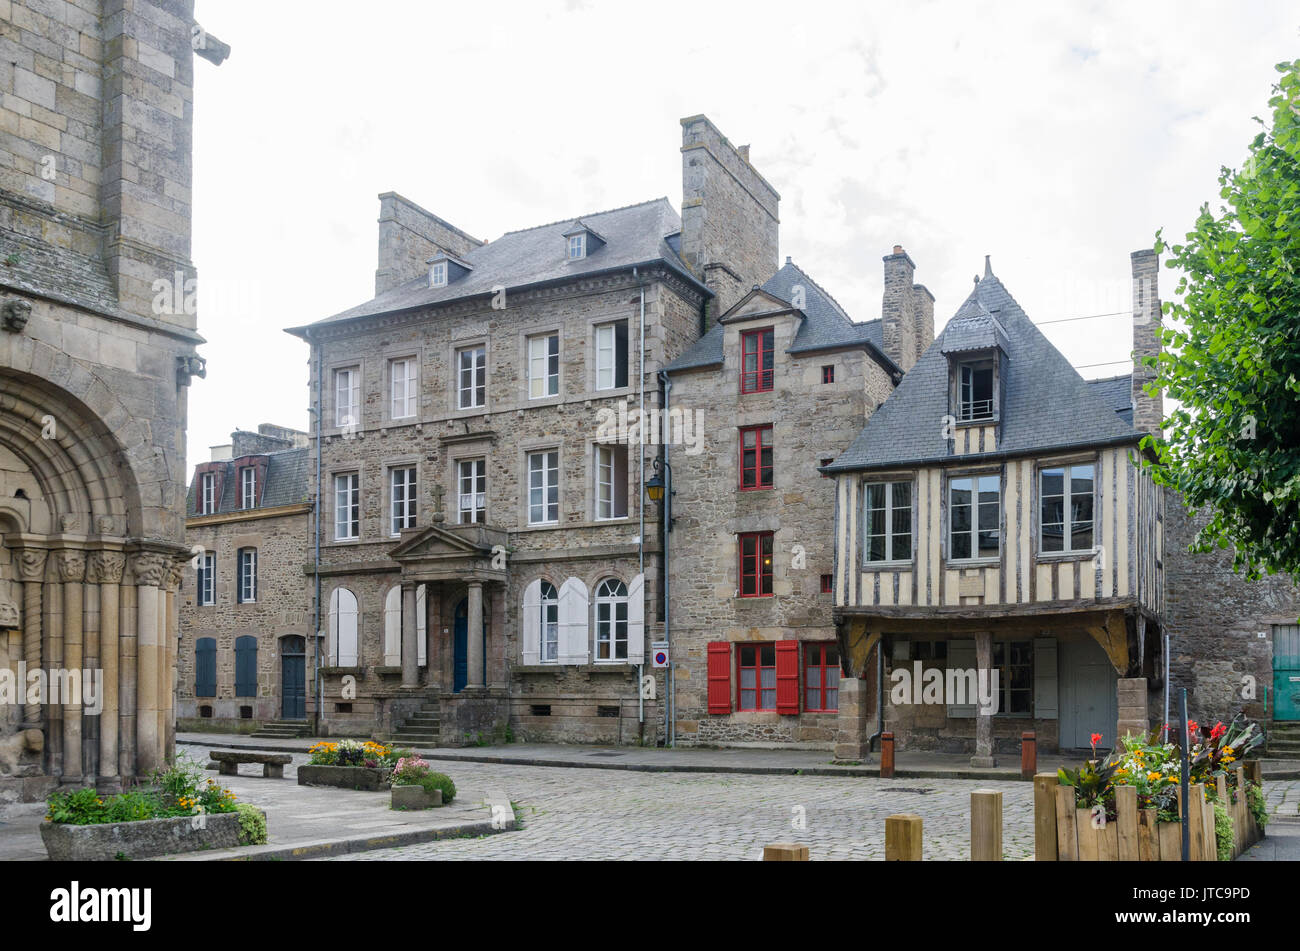 Old timber framed buildings in the historic walled town of Dinan in Brittany, France Stock Photo